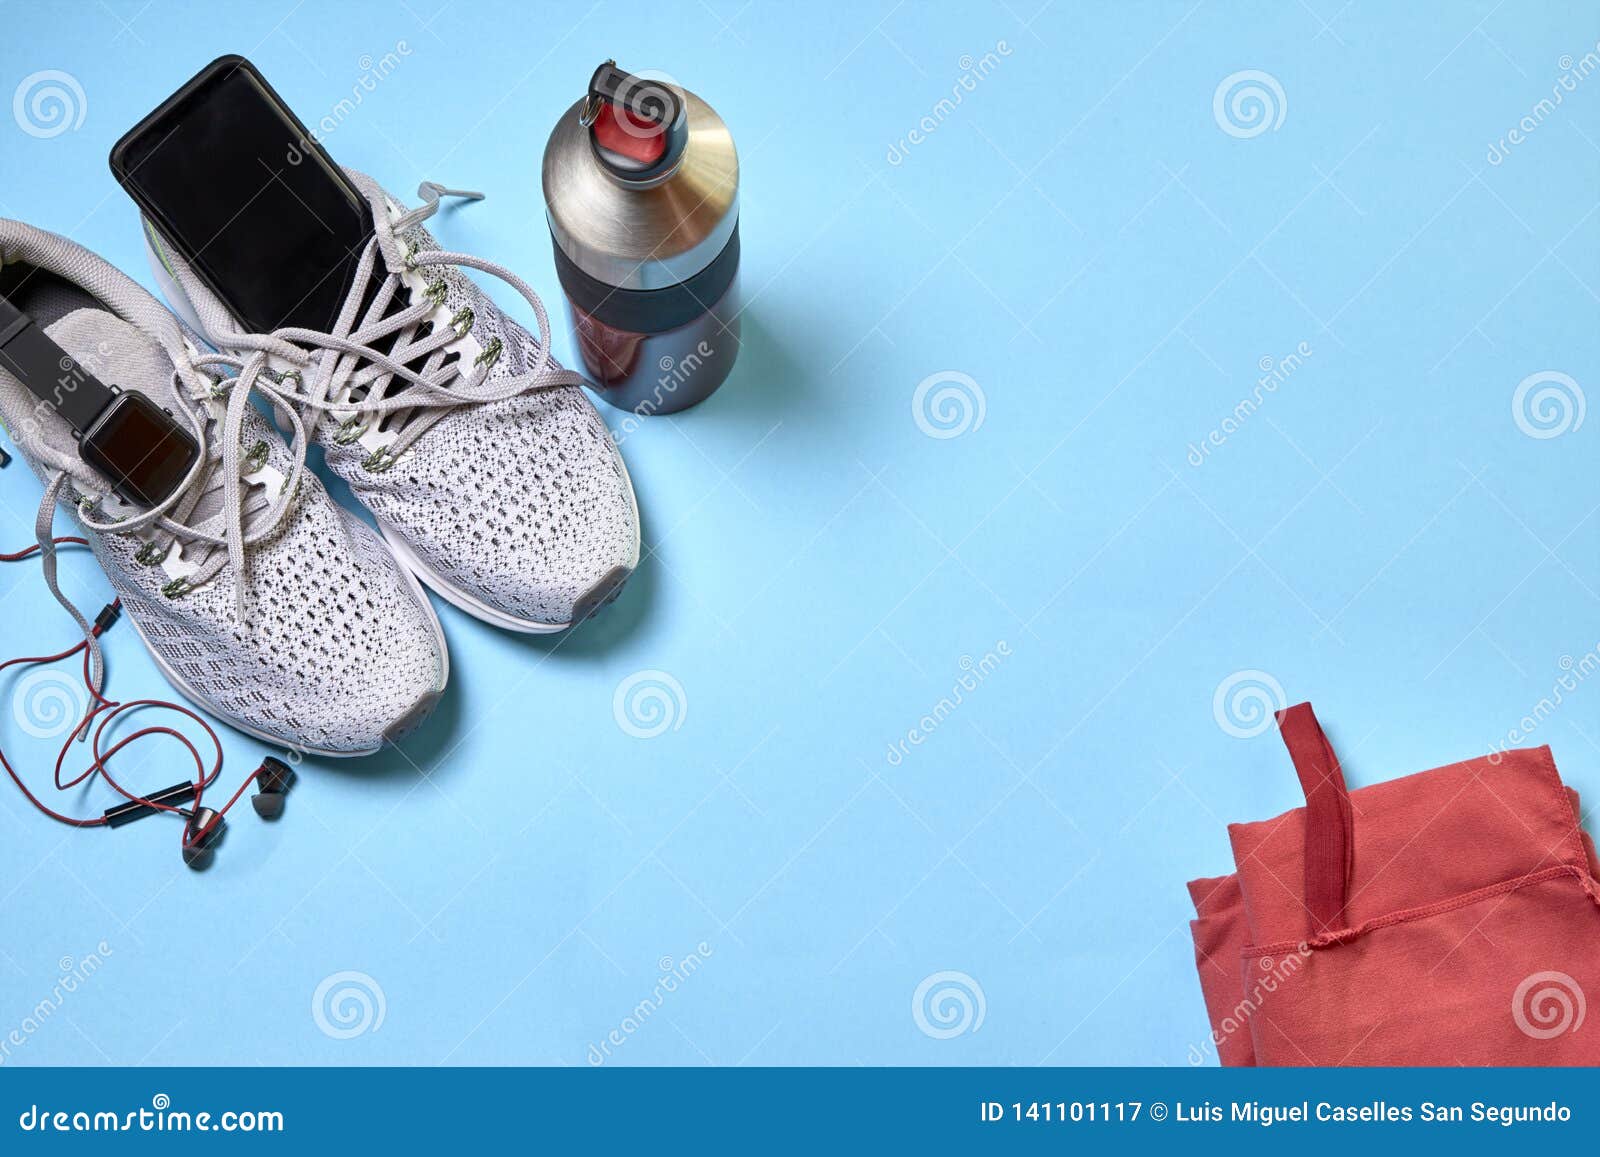 Running Shoes and Various Accessories Stock Image - Image of copy ...